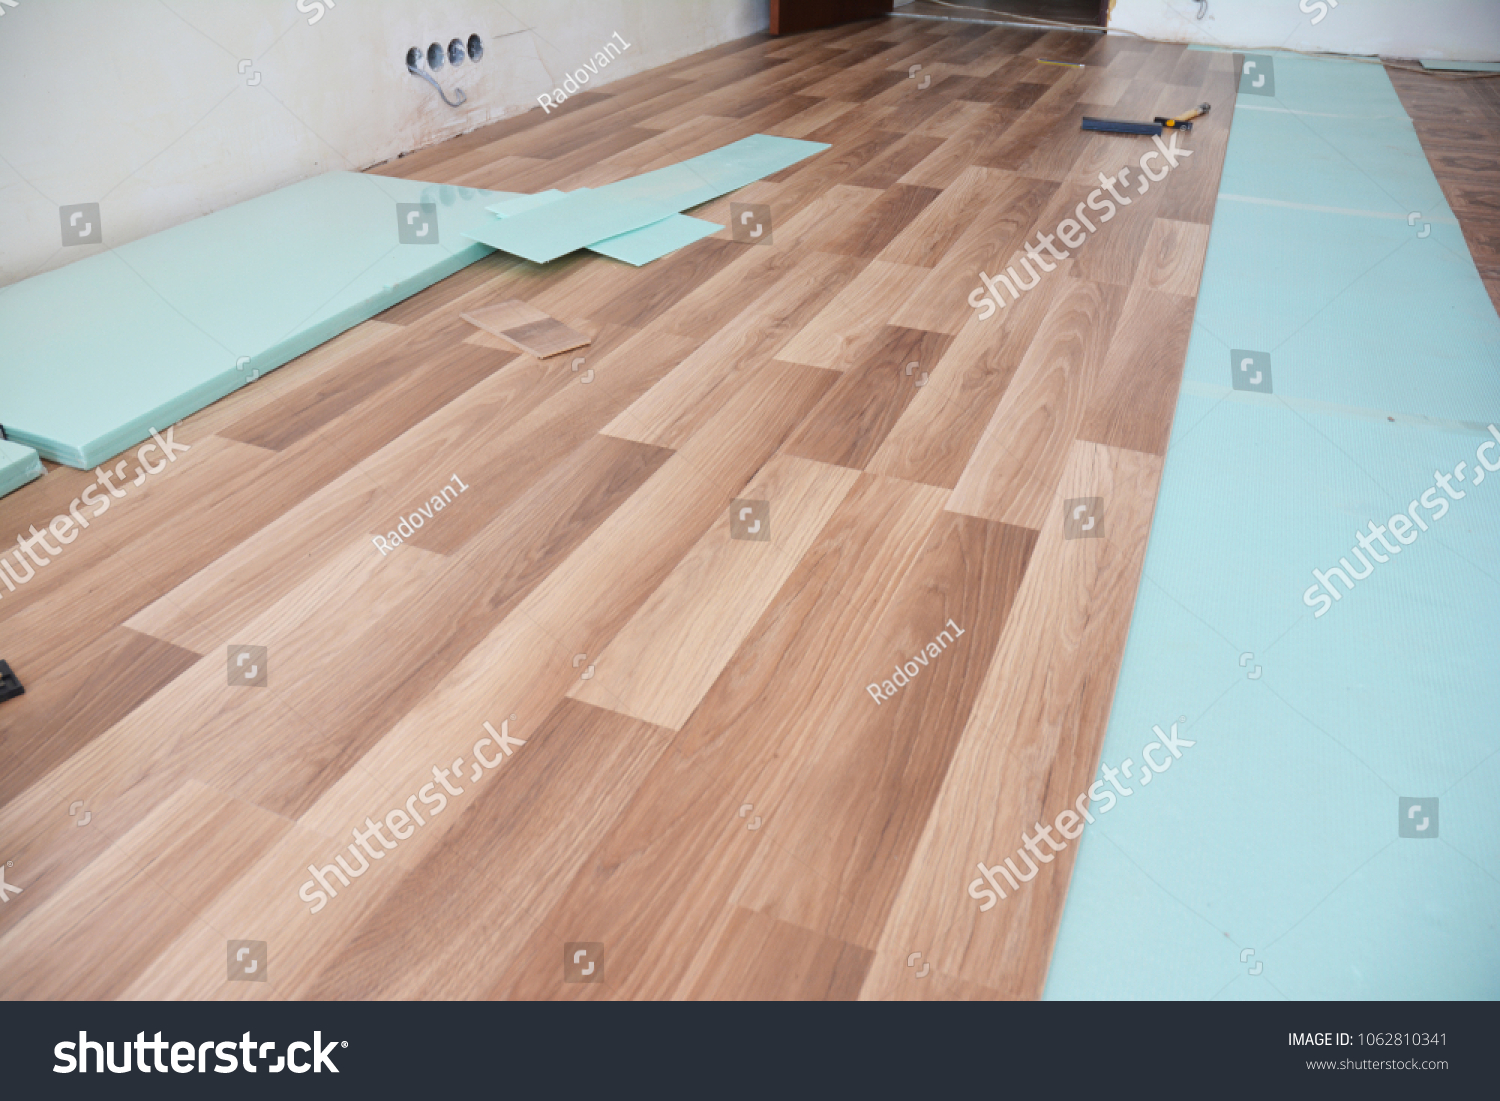 Installing Wooden Laminate Flooring Insulation Soundproofing Stock Photo Edit Now